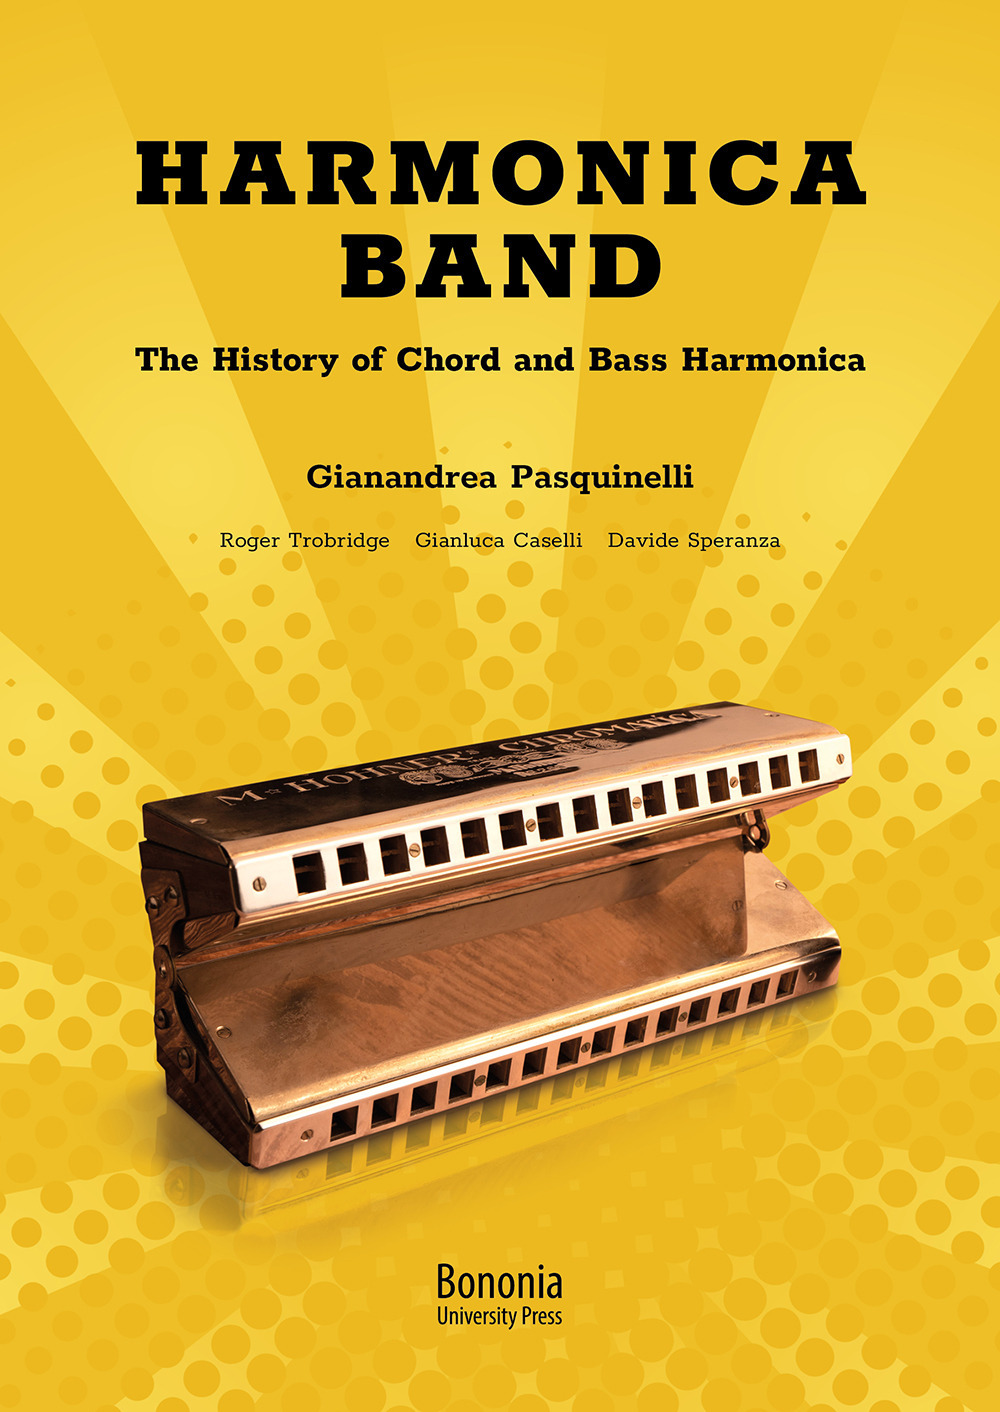 Harmonica Band. The History of Chord and Bass Harmonica